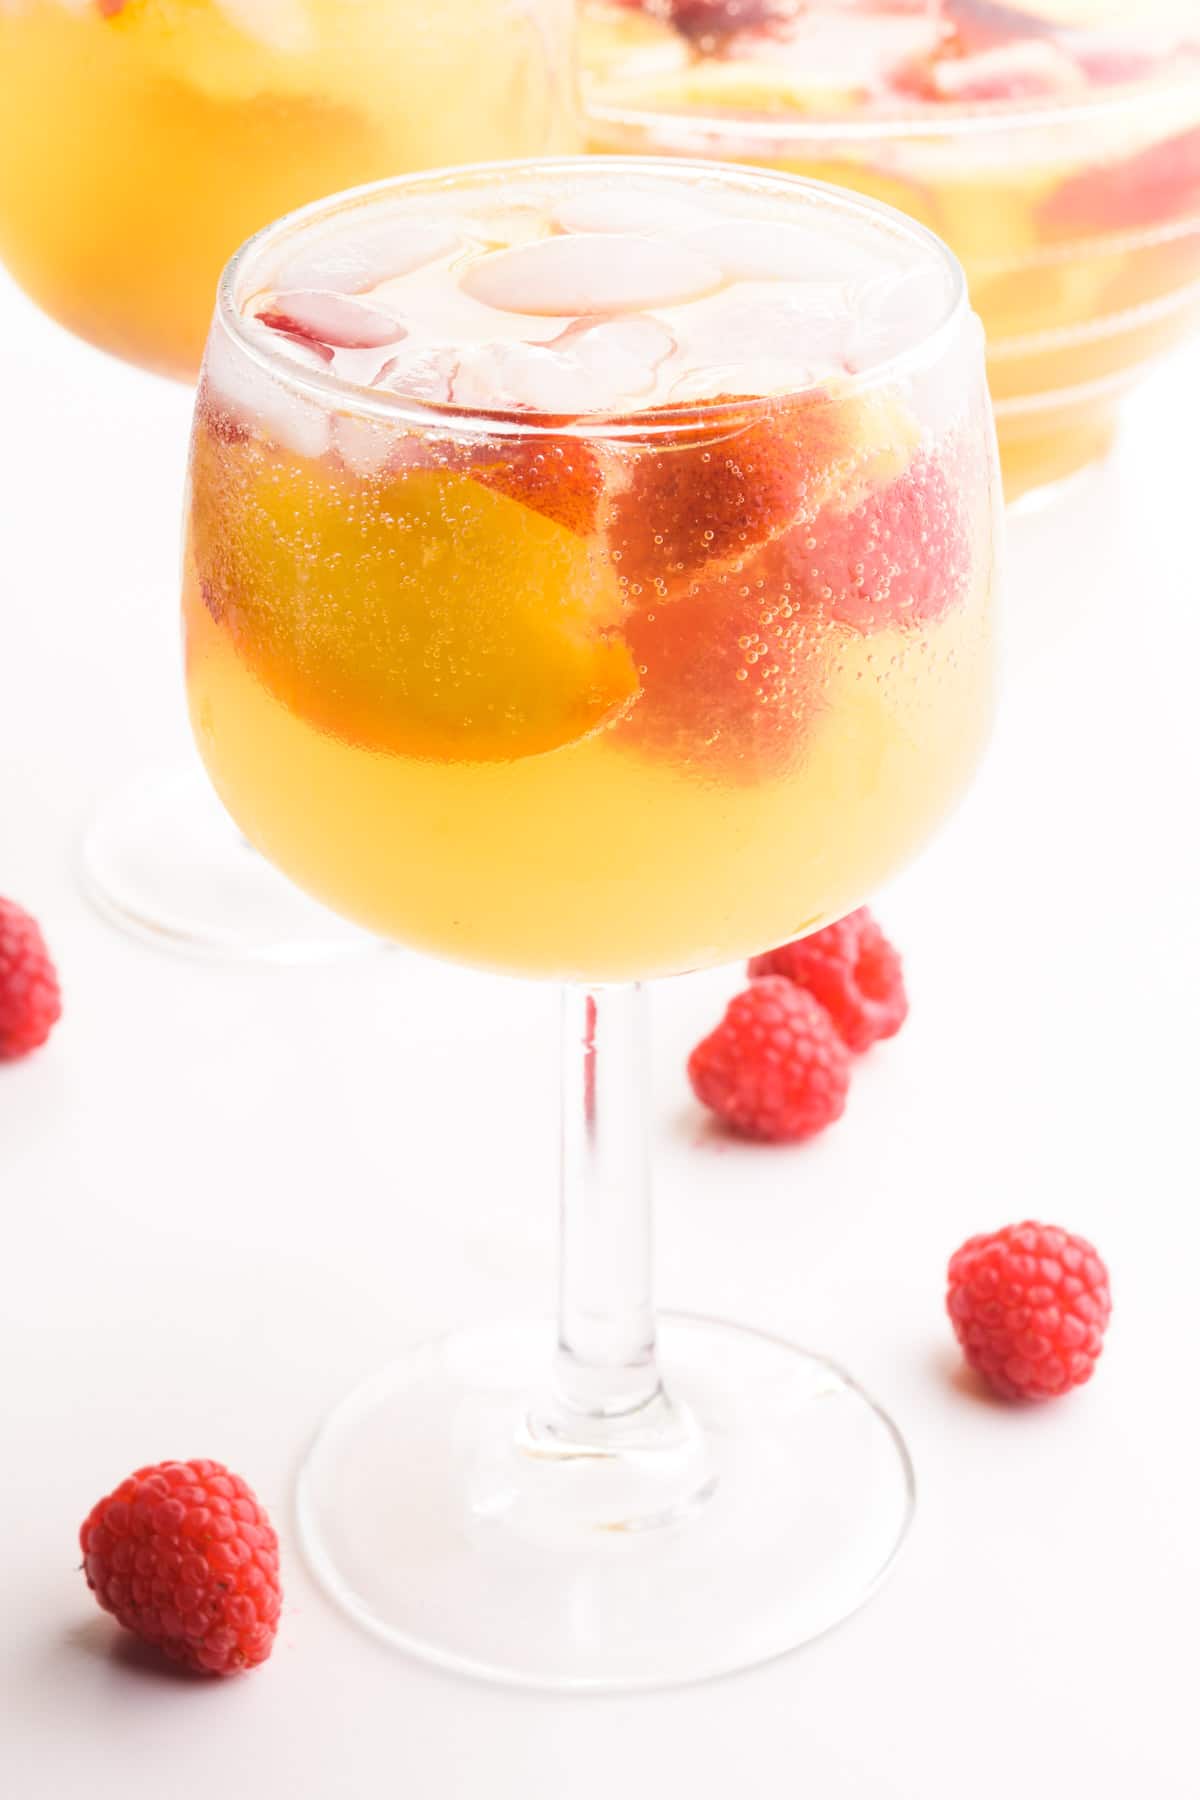 A wine glass holds peach sangria, ice cubes, raspberries, and peach slices. There is another glass and a pitcher in the background. There are fresh raspberries on the table beside the glasses.